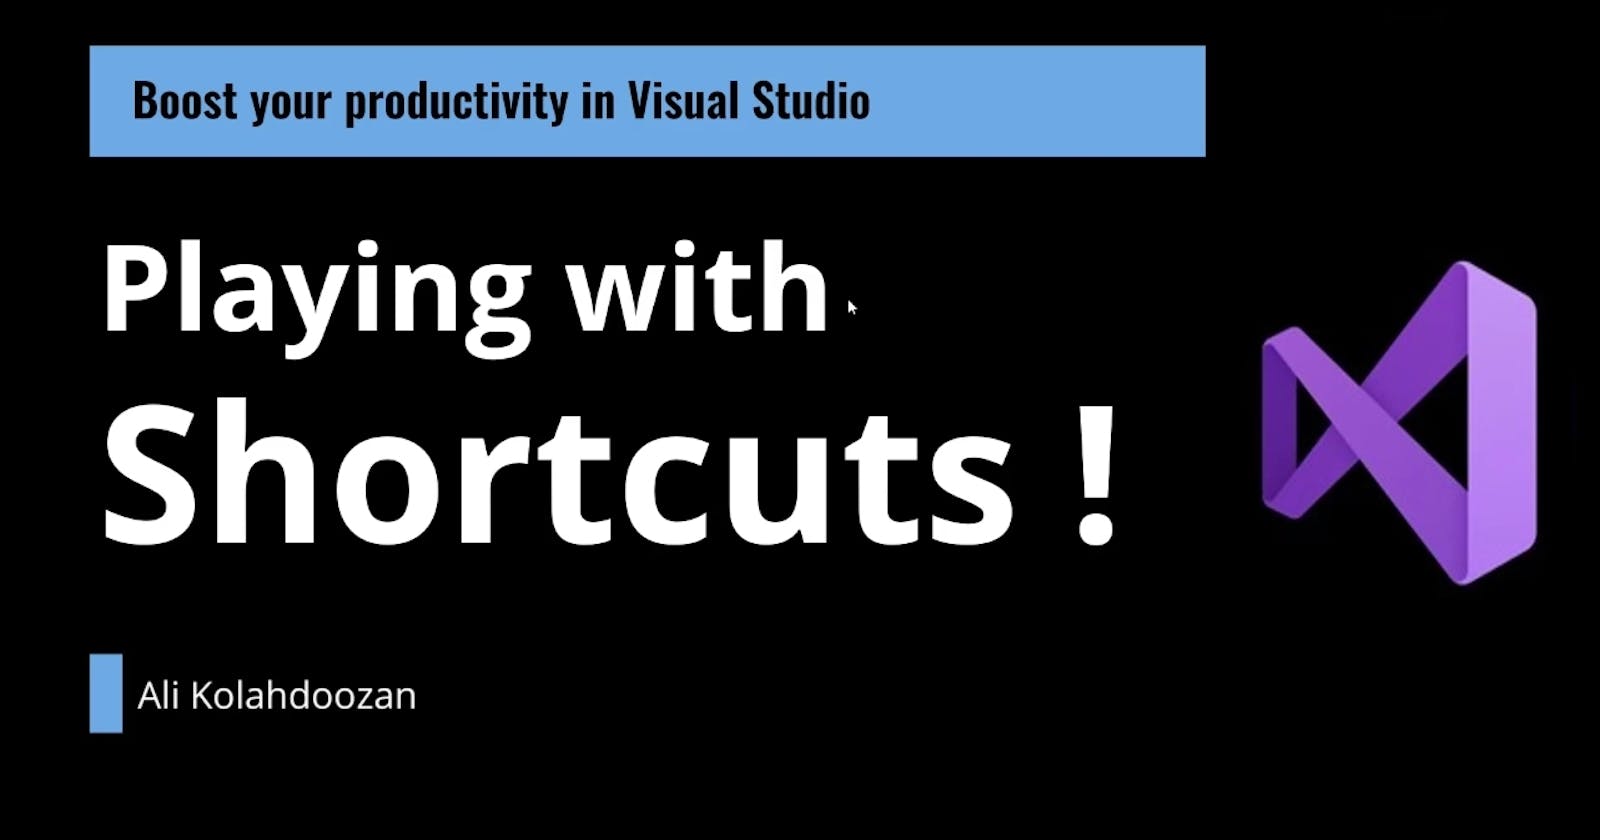 Boost your productivity in Visual Studio - Shortcuts